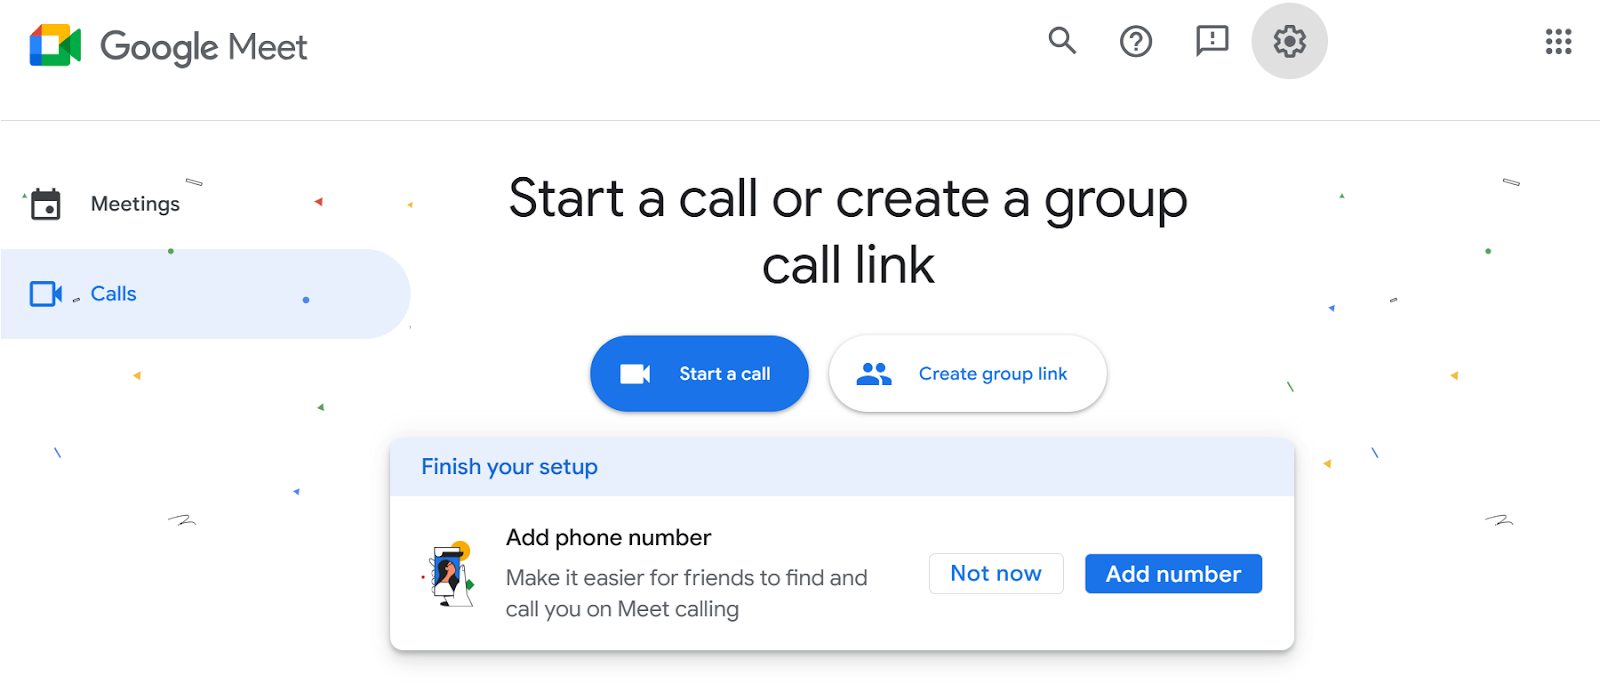 Google Duo website snapshot highlighting the services it offers.